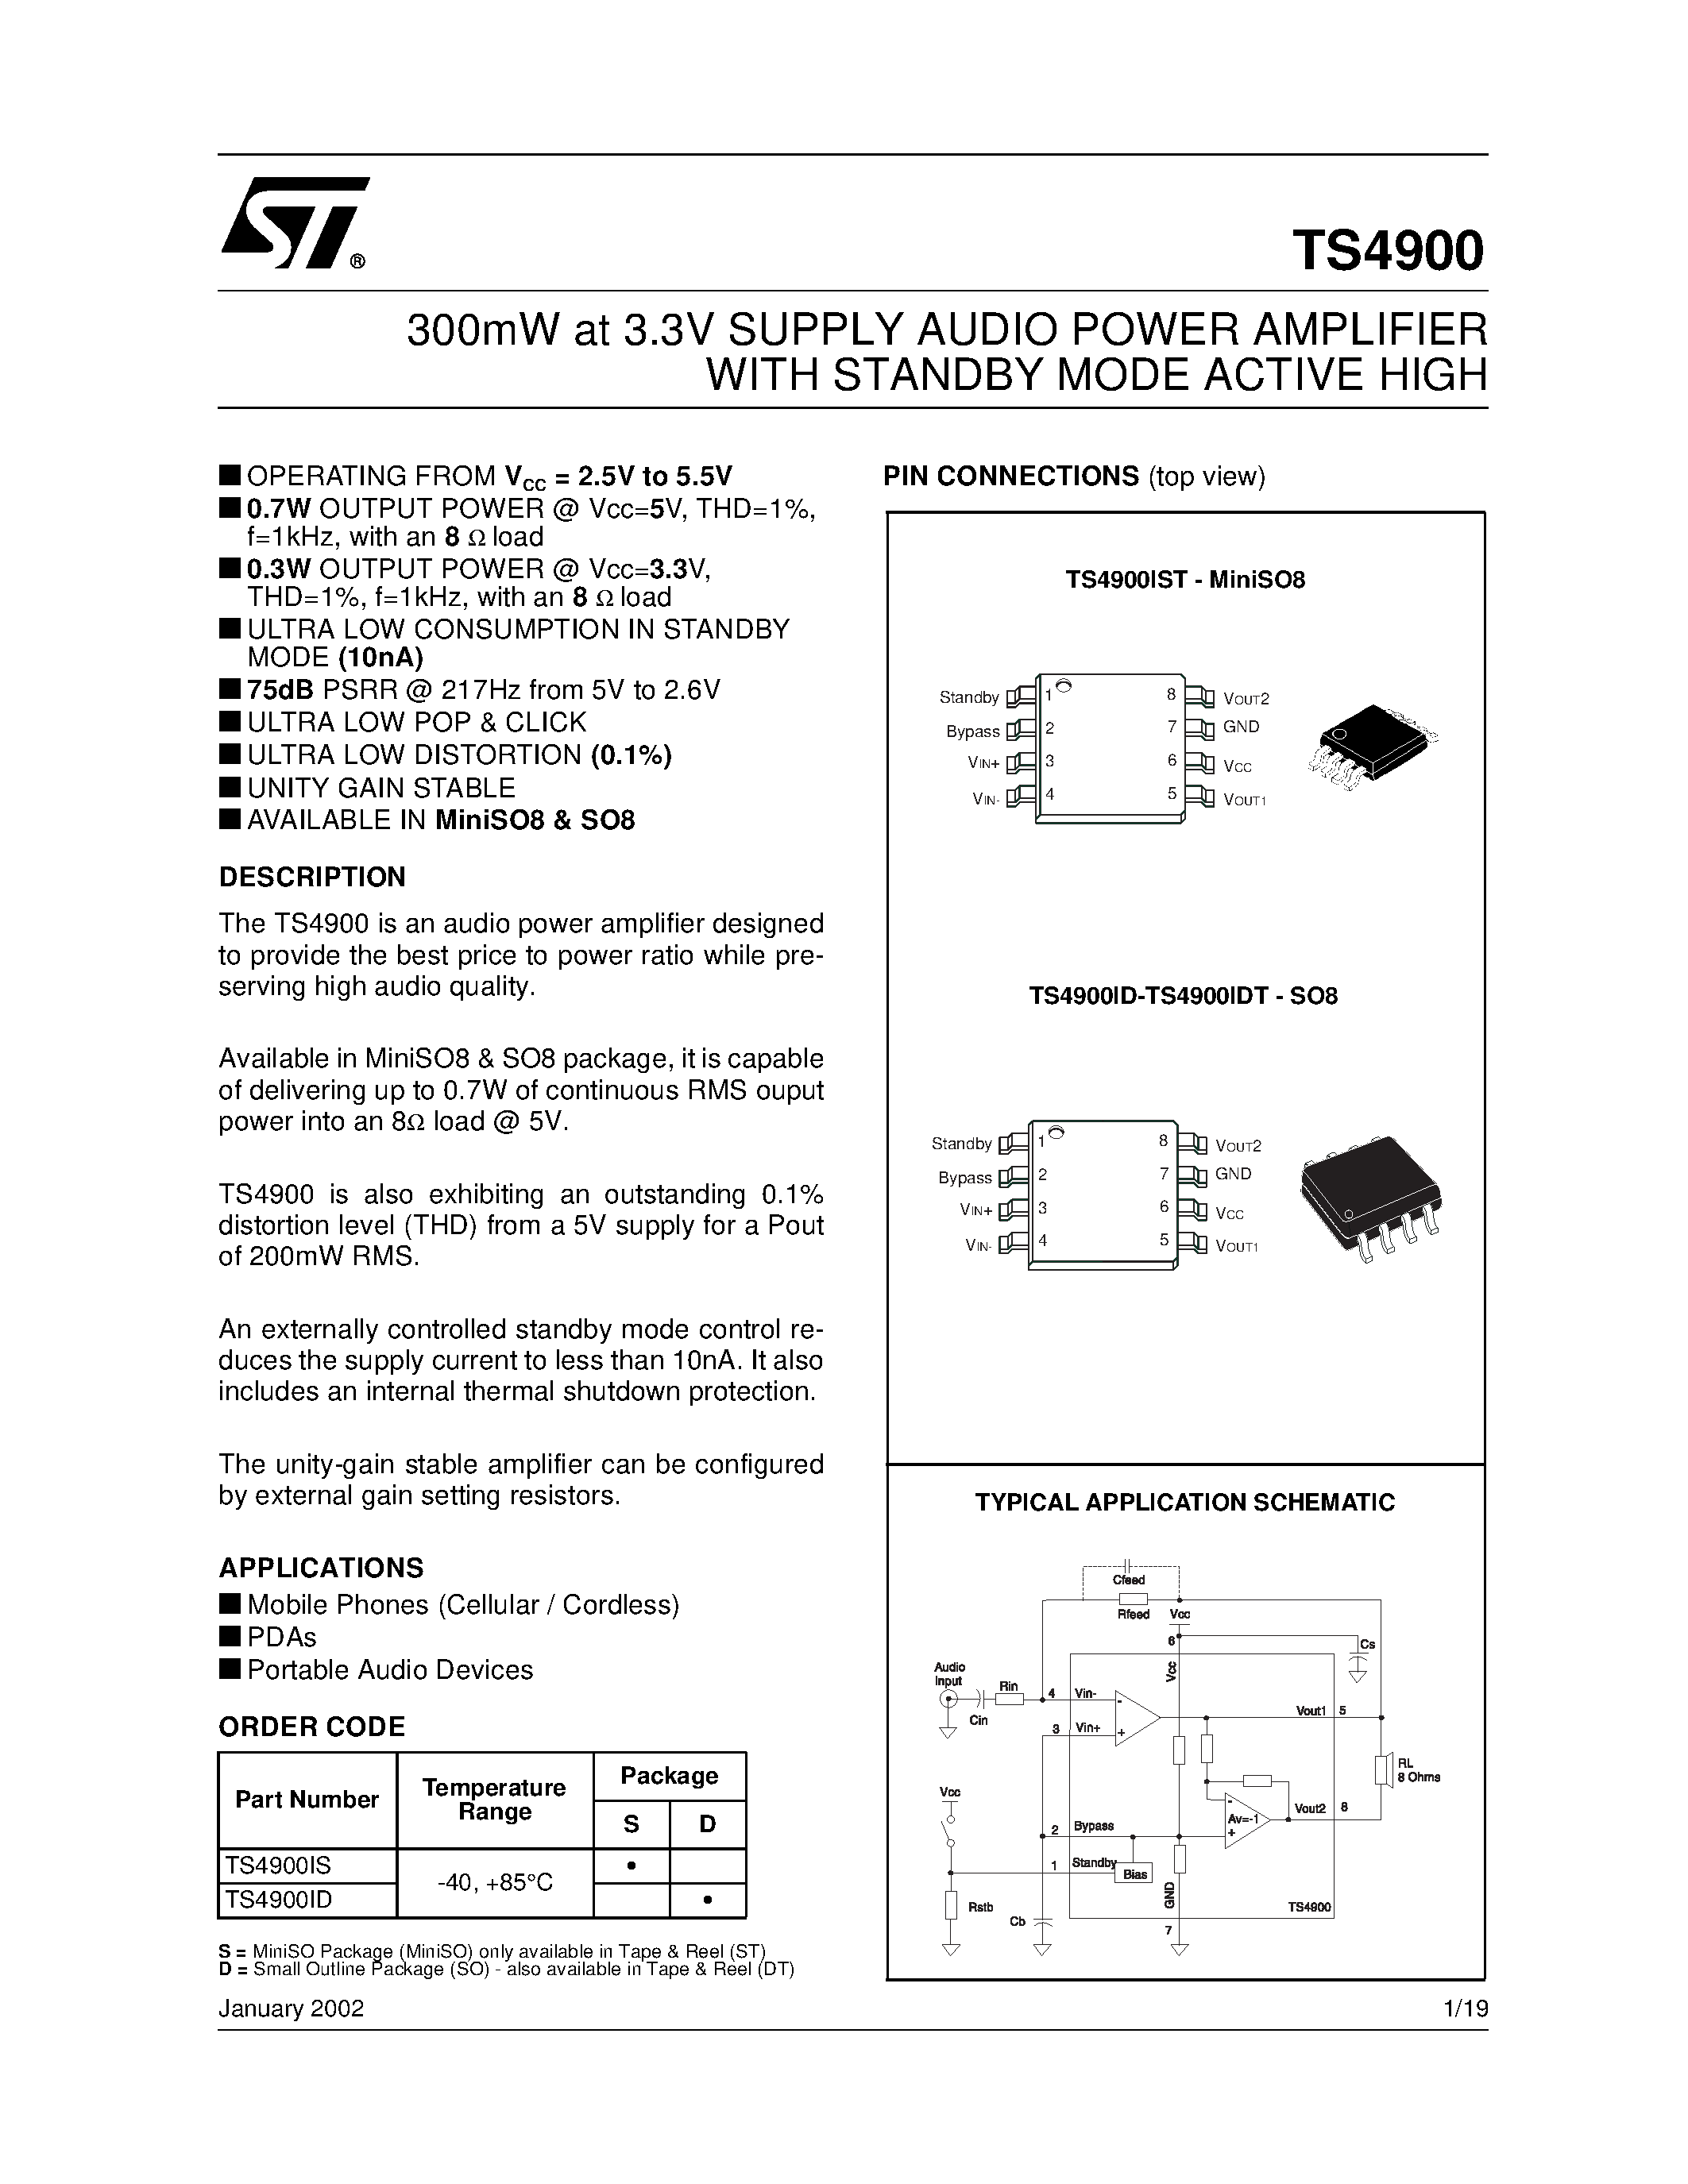 Datasheet TS4900 - 300mW at 3.3V SUPPLY AUDIO POWER AMPLIFIER WITH STANDBY MODE ACTIVE HIGH page 1